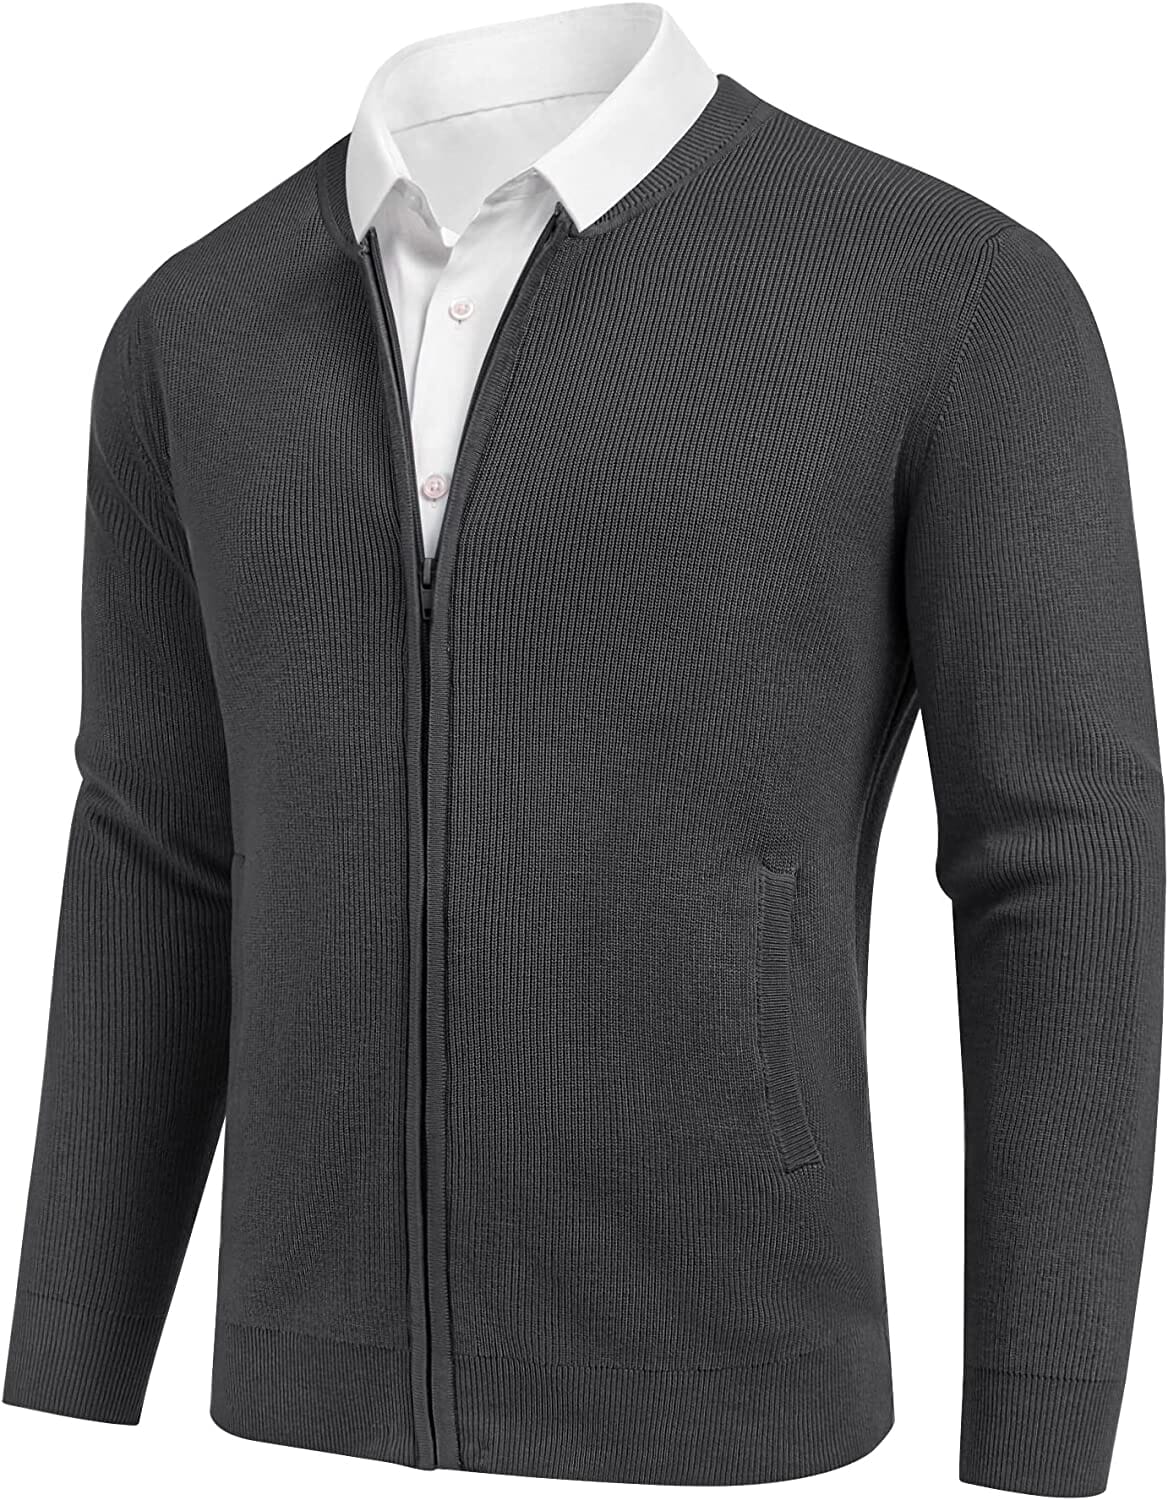 Full Zip Slim Fit Stylish Knitted Cardigan Sweater with Pockets (US Only) Sweaters COOFANDY Store Solid Dark Grey S 